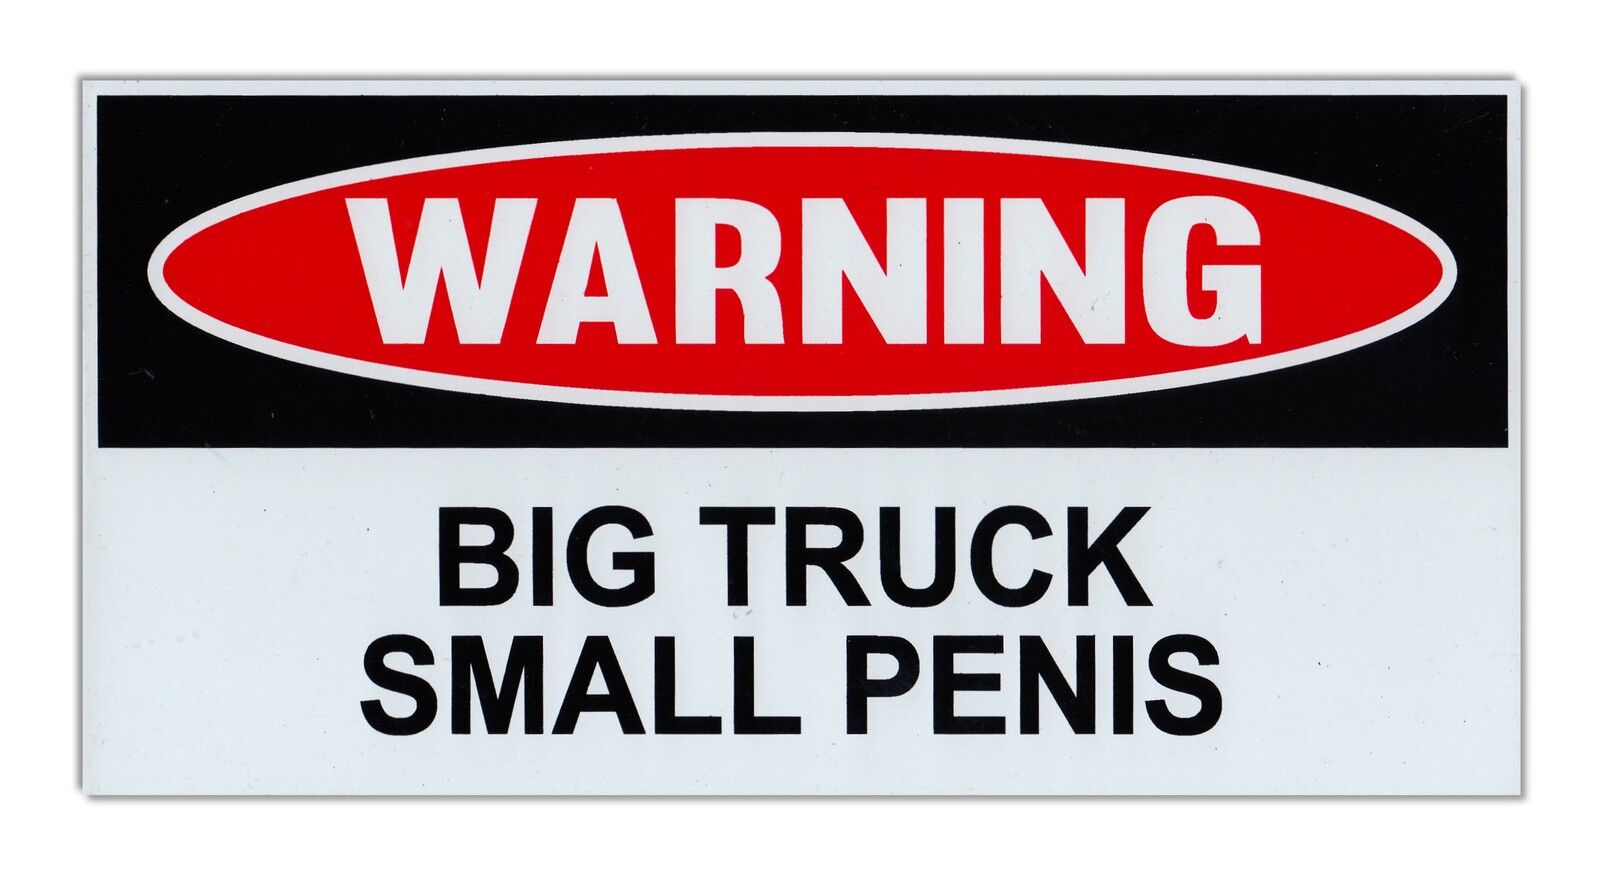 Giant Size - Funny Warning Magnets - Big Truck Small Penis - Practical Jokes